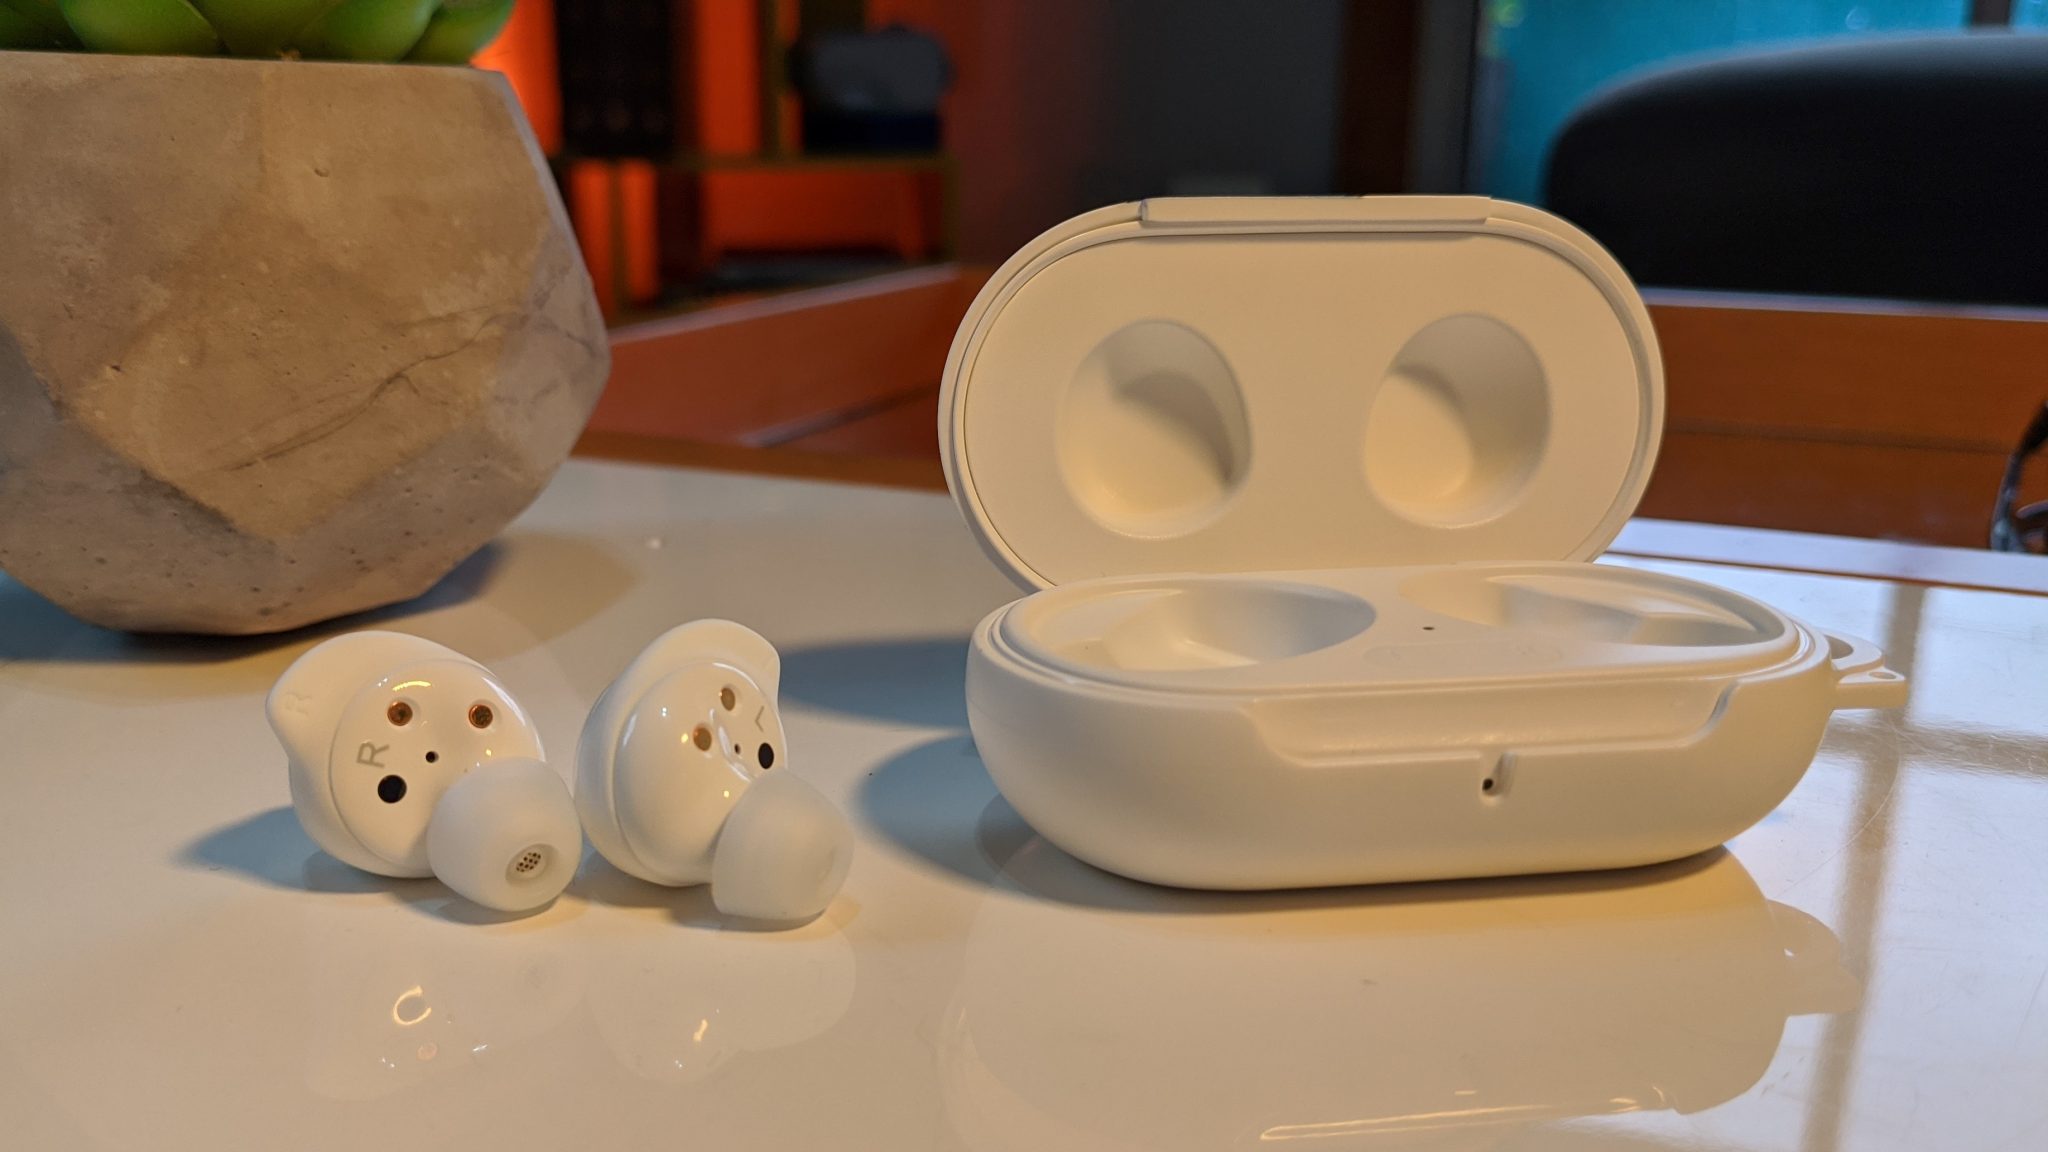 REVIEW: Galaxy Buds +, an evolution in sound quality and autonomy